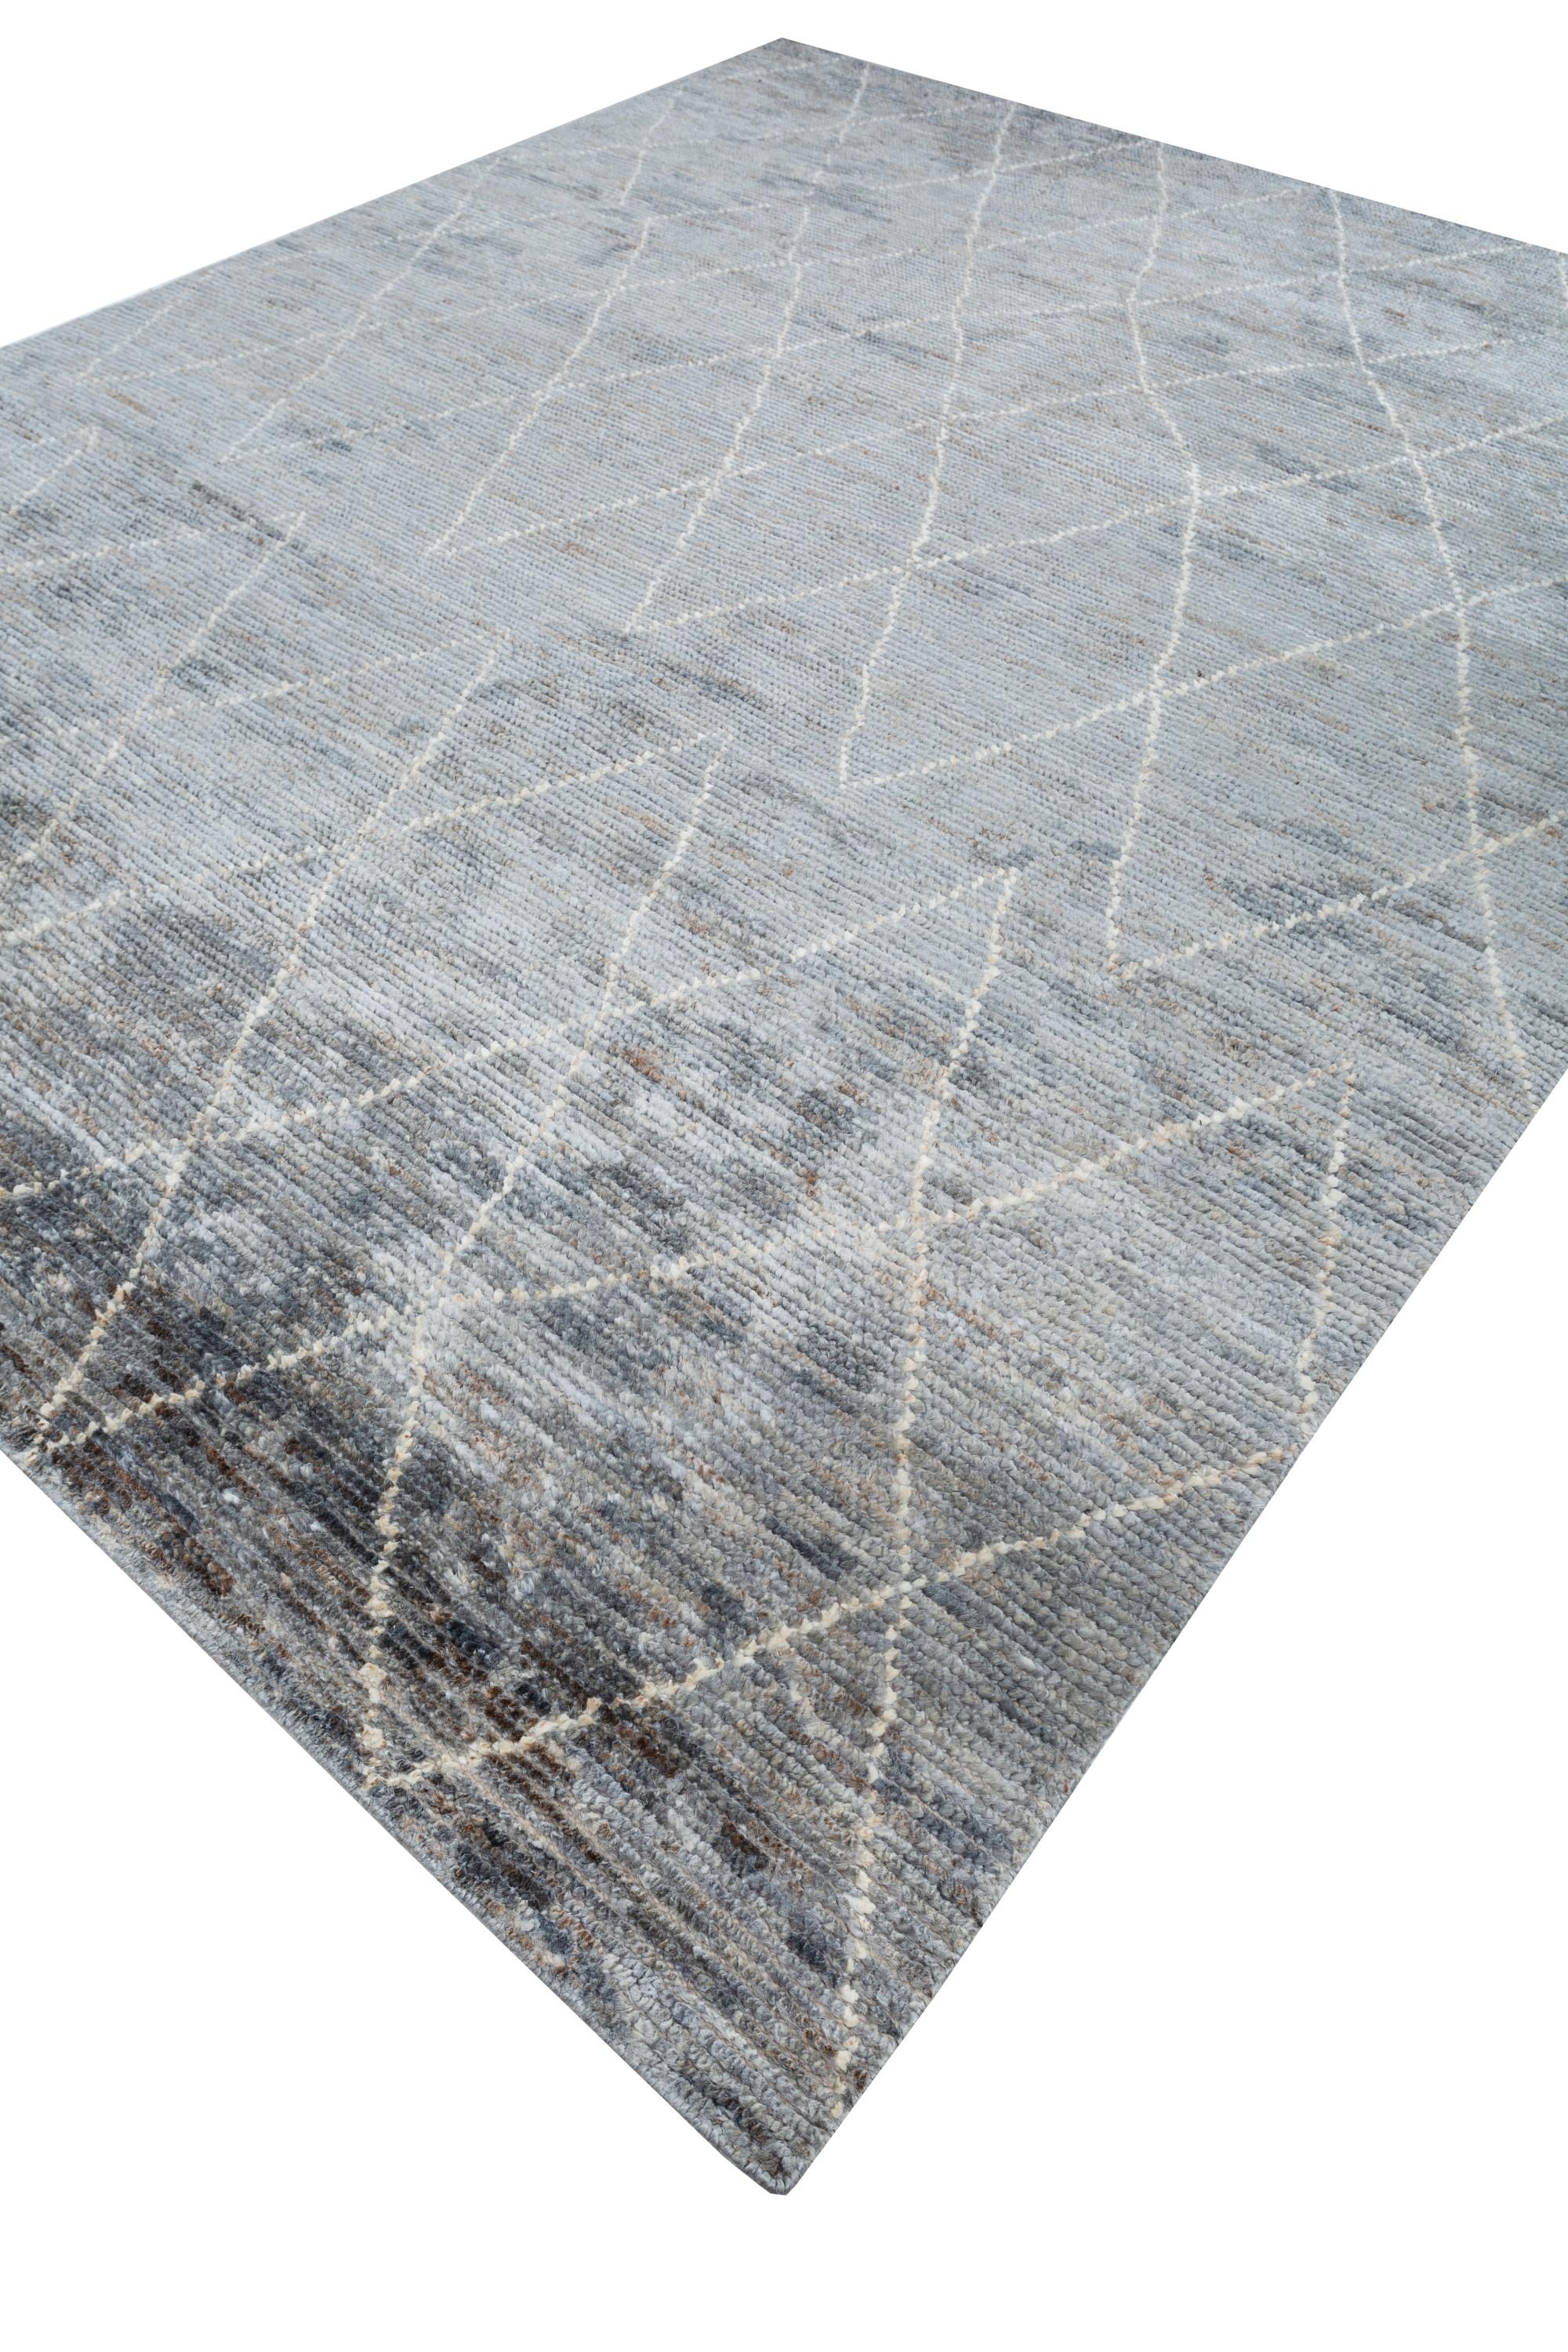 Modern Cultural Mosaic Glacier Gray & White 240X300 cm Hand-Knotted Rug For Sale